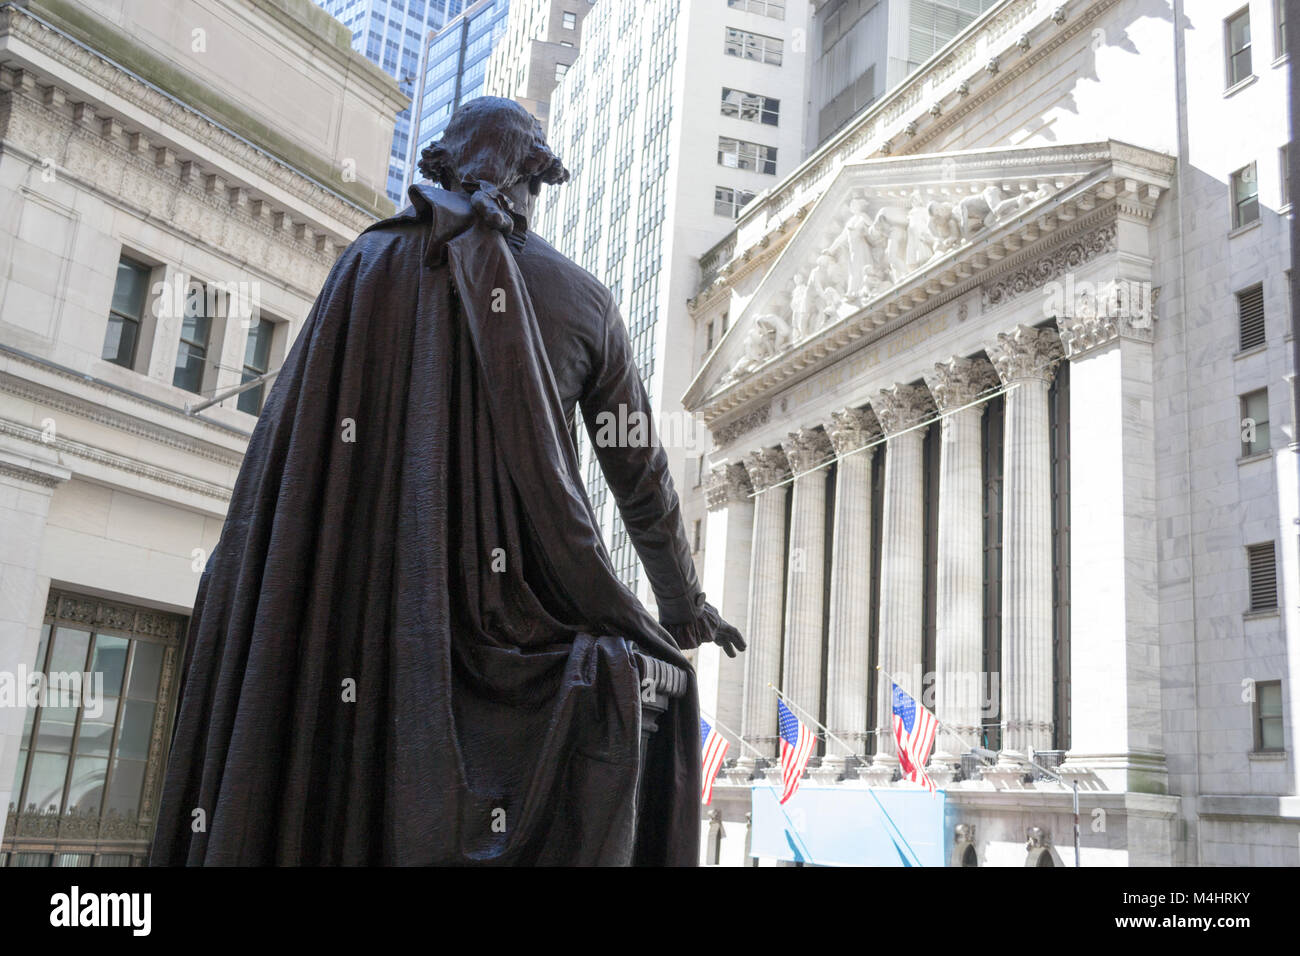 George Washington observing the New York Stock Exchange building Stock Photo